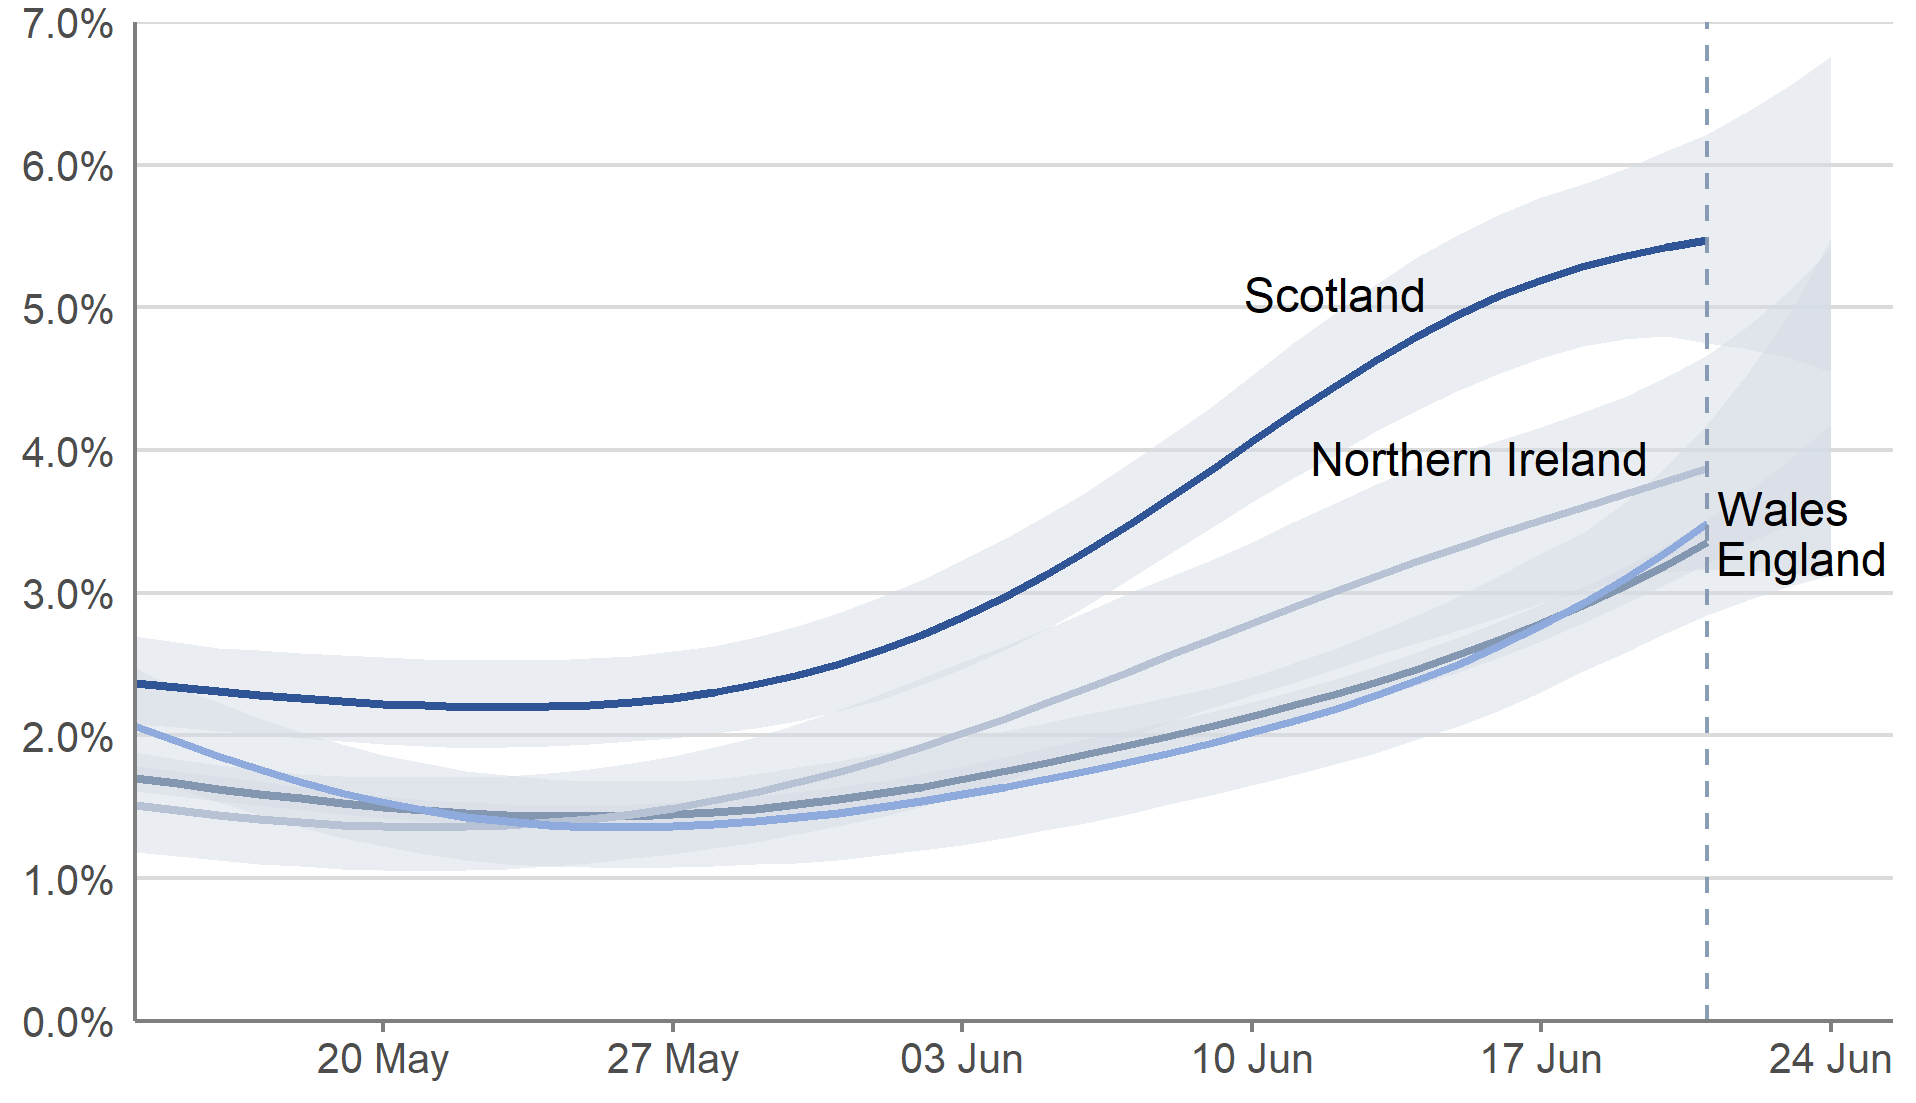 A line chart showing modelled daily estimates of the percentage of the population testing positive for COVID-19 in each of the four nations of the UK, between 14 May and 24 June 2022. Modelled daily estimates are represented by four lines with 95% credible intervals in pale blue shading. The lines are dark blue for Scotland, light blue for Wales, dark grey for England and light grey for Northern Ireland. A vertical dashed line near the end of the series indicating greater uncertainty in estimates for the last three reported days. In the most recent week, the estimated percentage of people testing positive for COVID-19 continued to increase in all four nations.